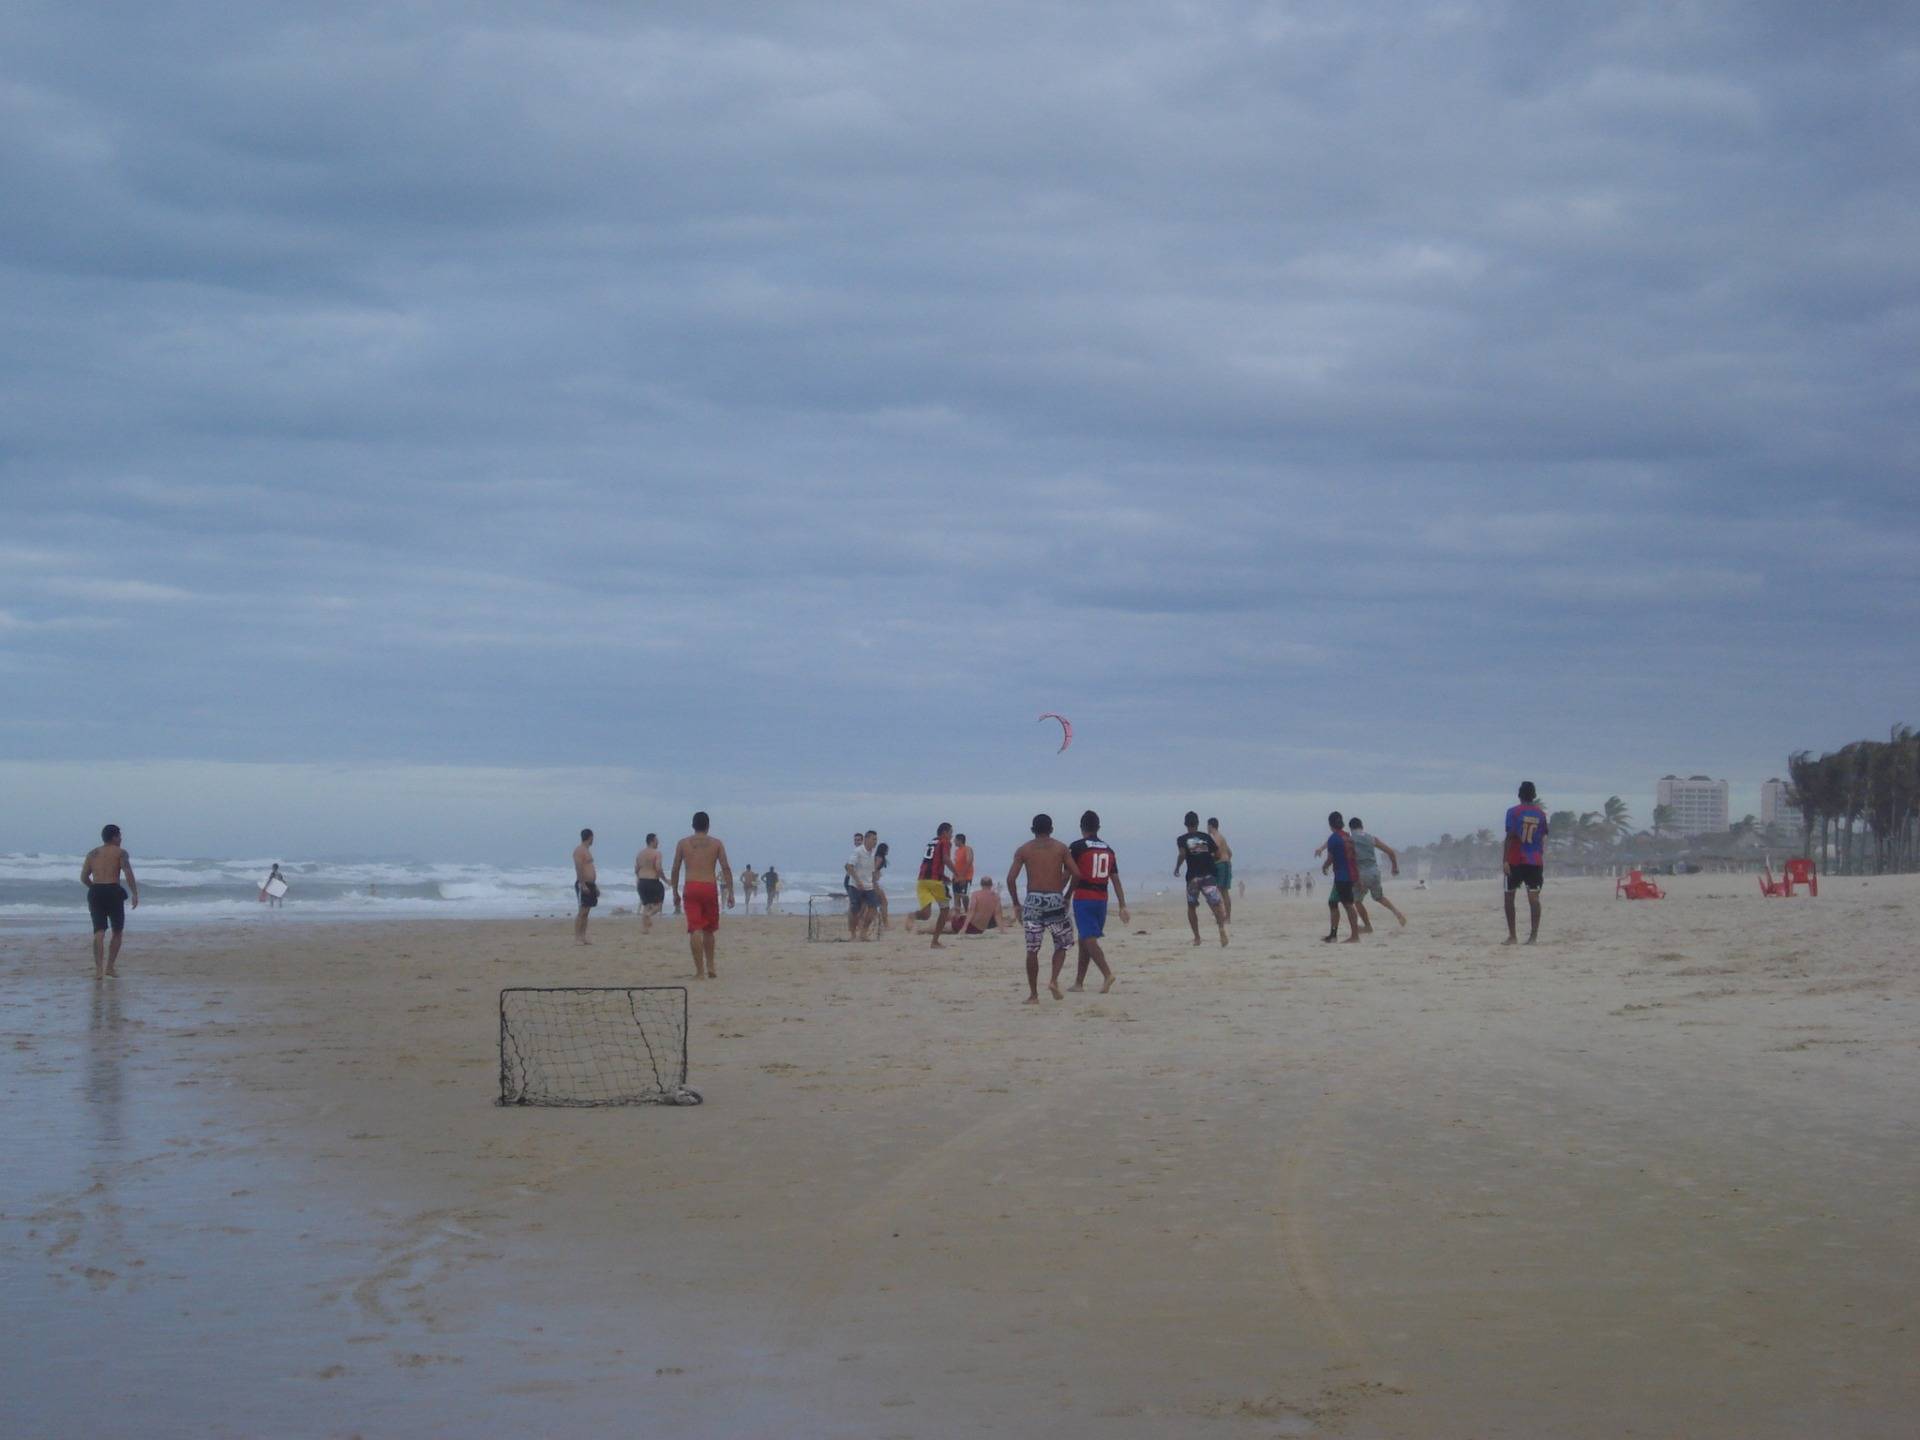 In Brazil there is soccer anywhere